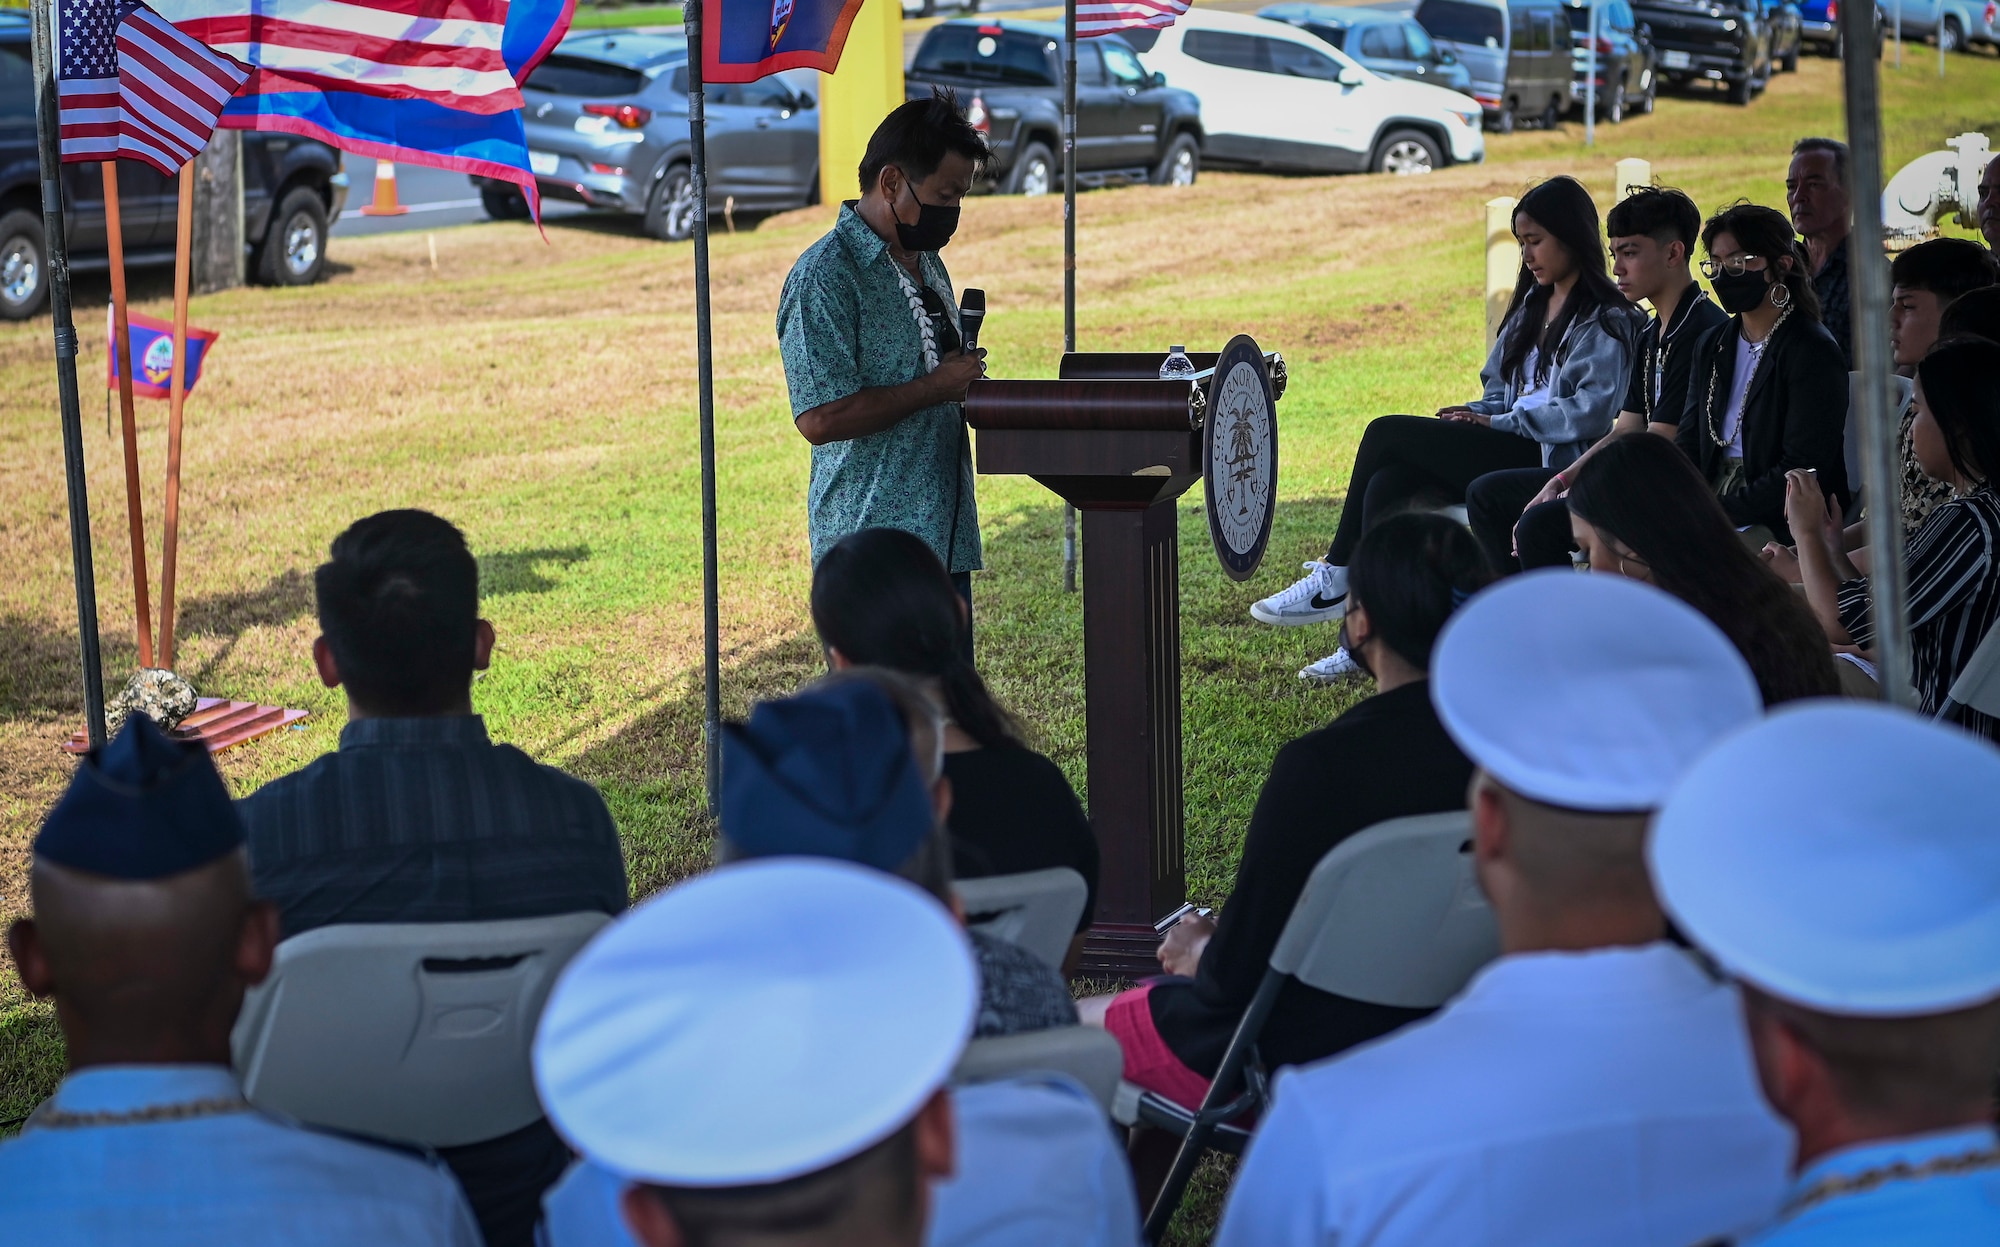 Rudy A. Paco, Mayor of Mongmong-Toto-Maite, Guam, speaks during the Hasso Monmong-Toto-Maite Marine Depot Memorial Ceremony in Maite, Guam on July 7, 2022.